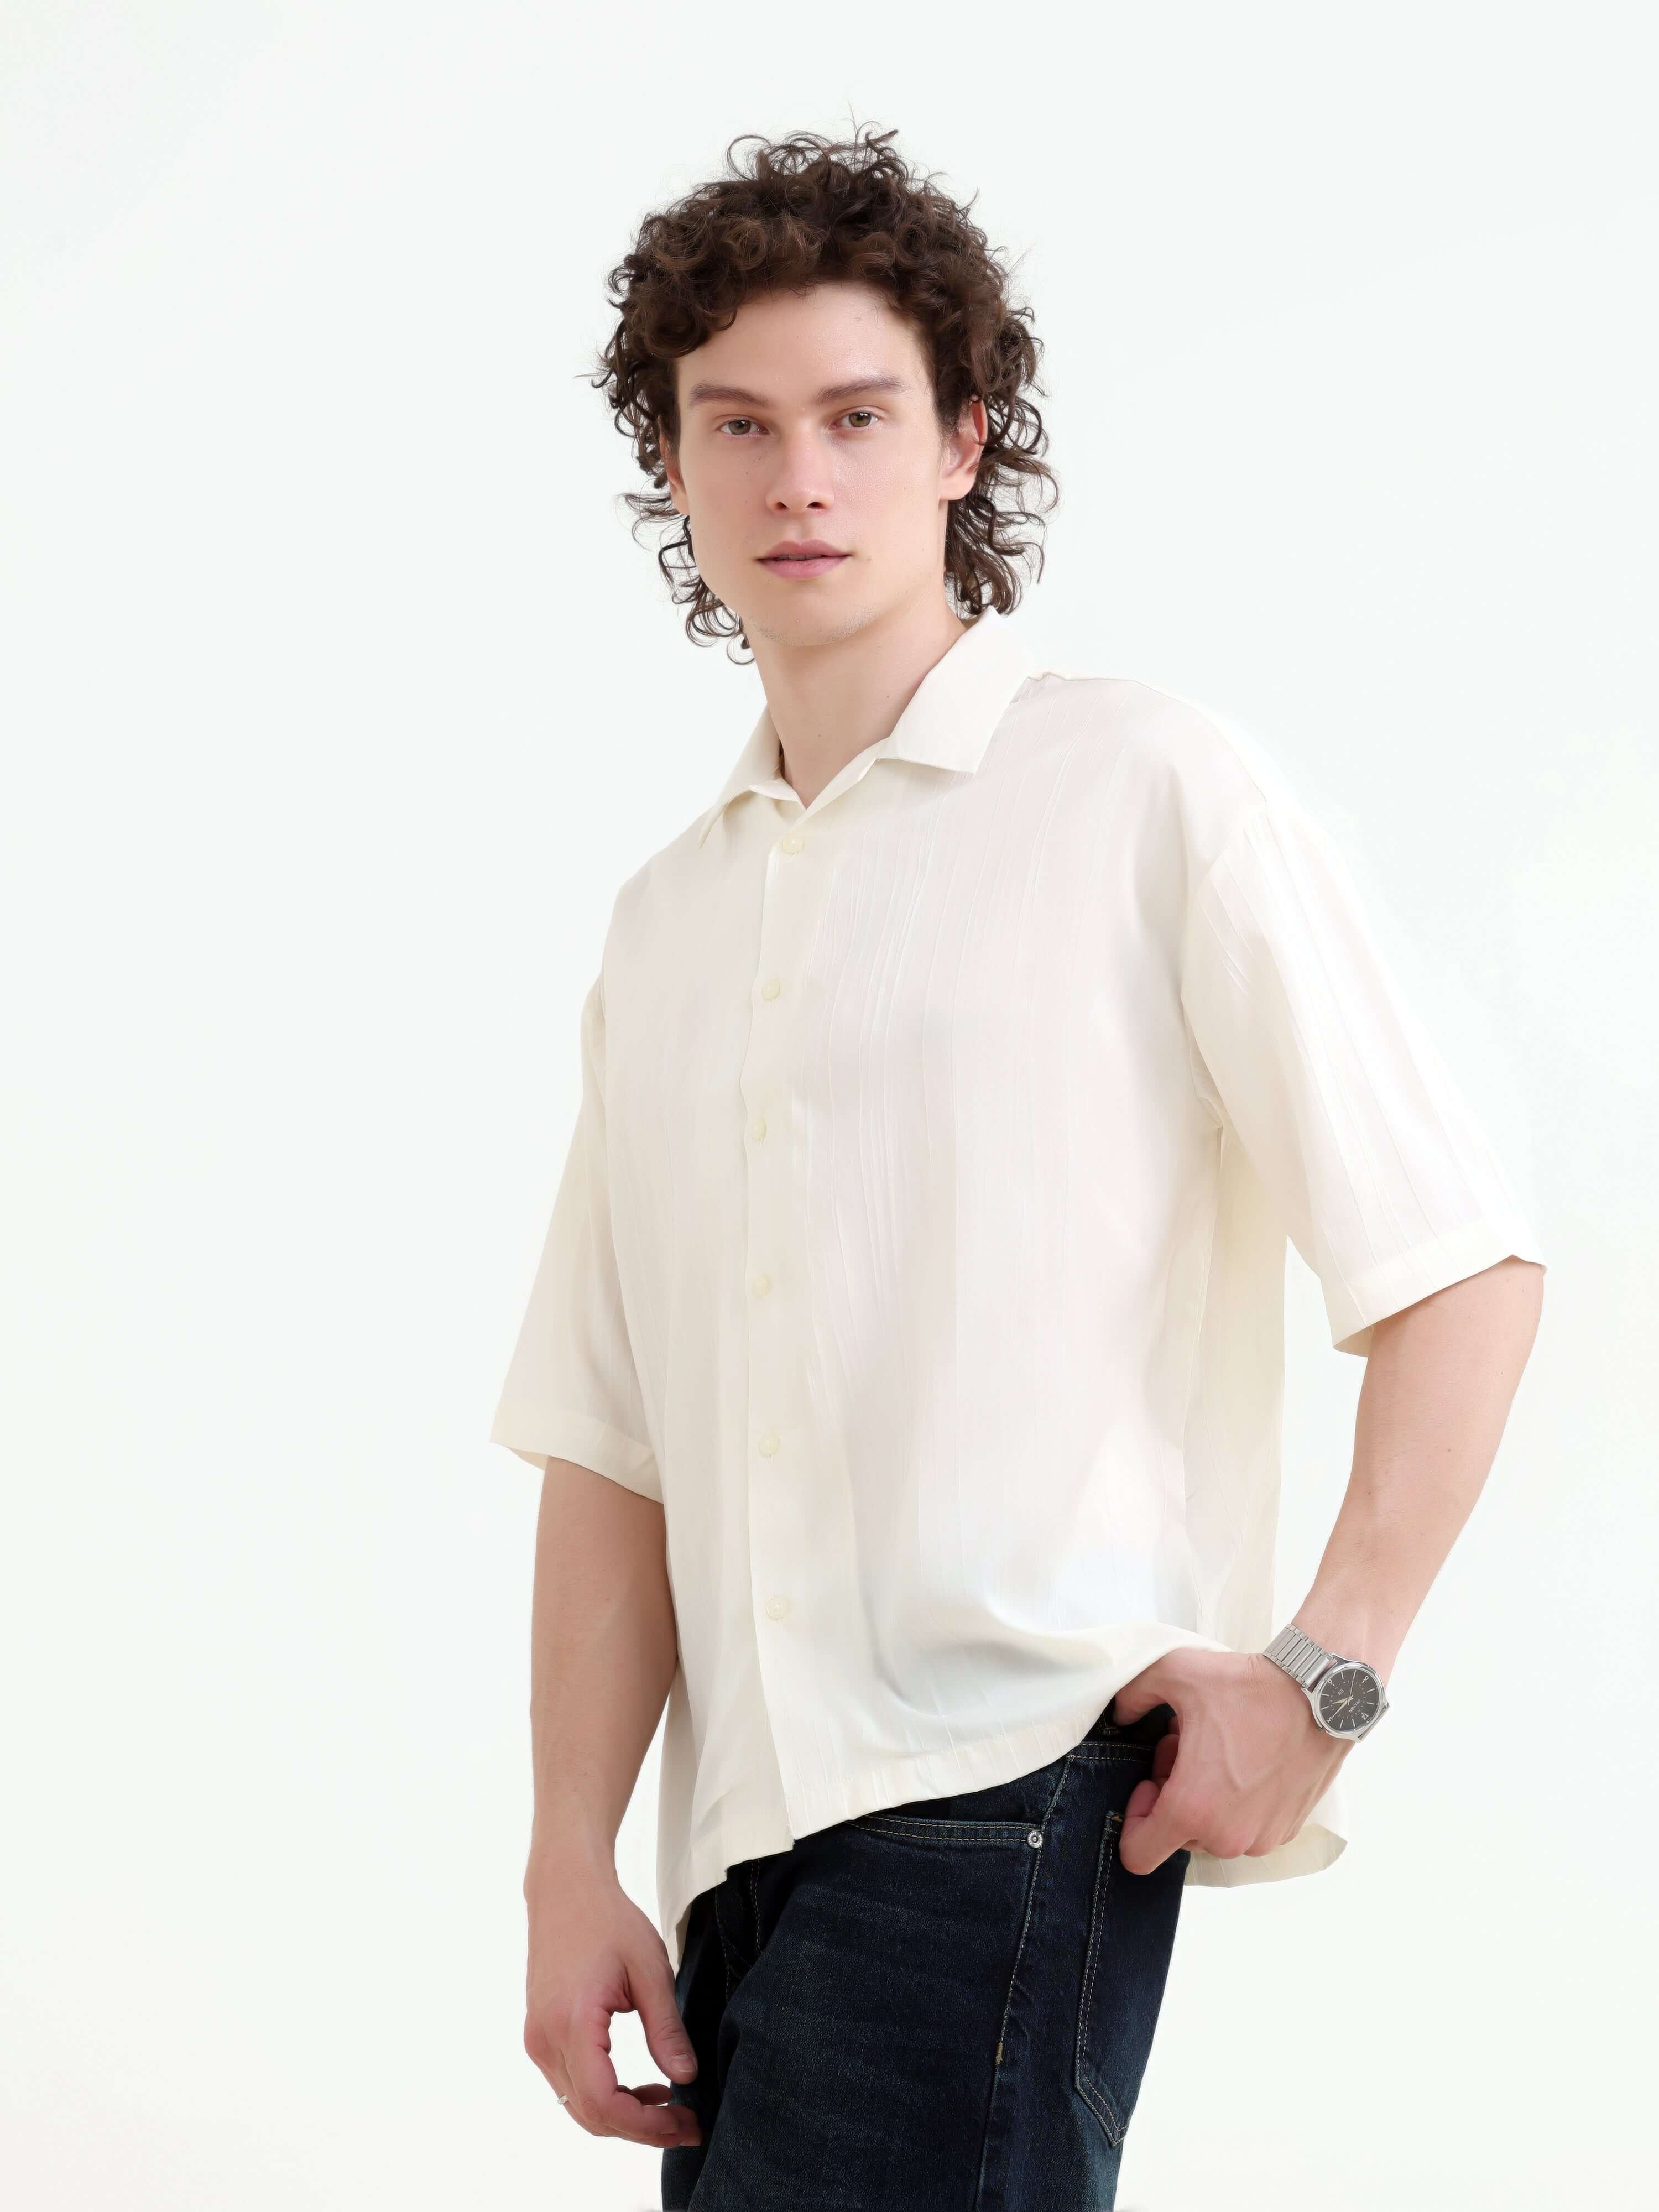 Men's Pastel Cream Oversized Shirt - Summer Chic shop online at Estilocus. Embrace summer in style with our men's pastel cream shirt. Lightweight, oversized for comfort - a fresh addition to your wardrobe!